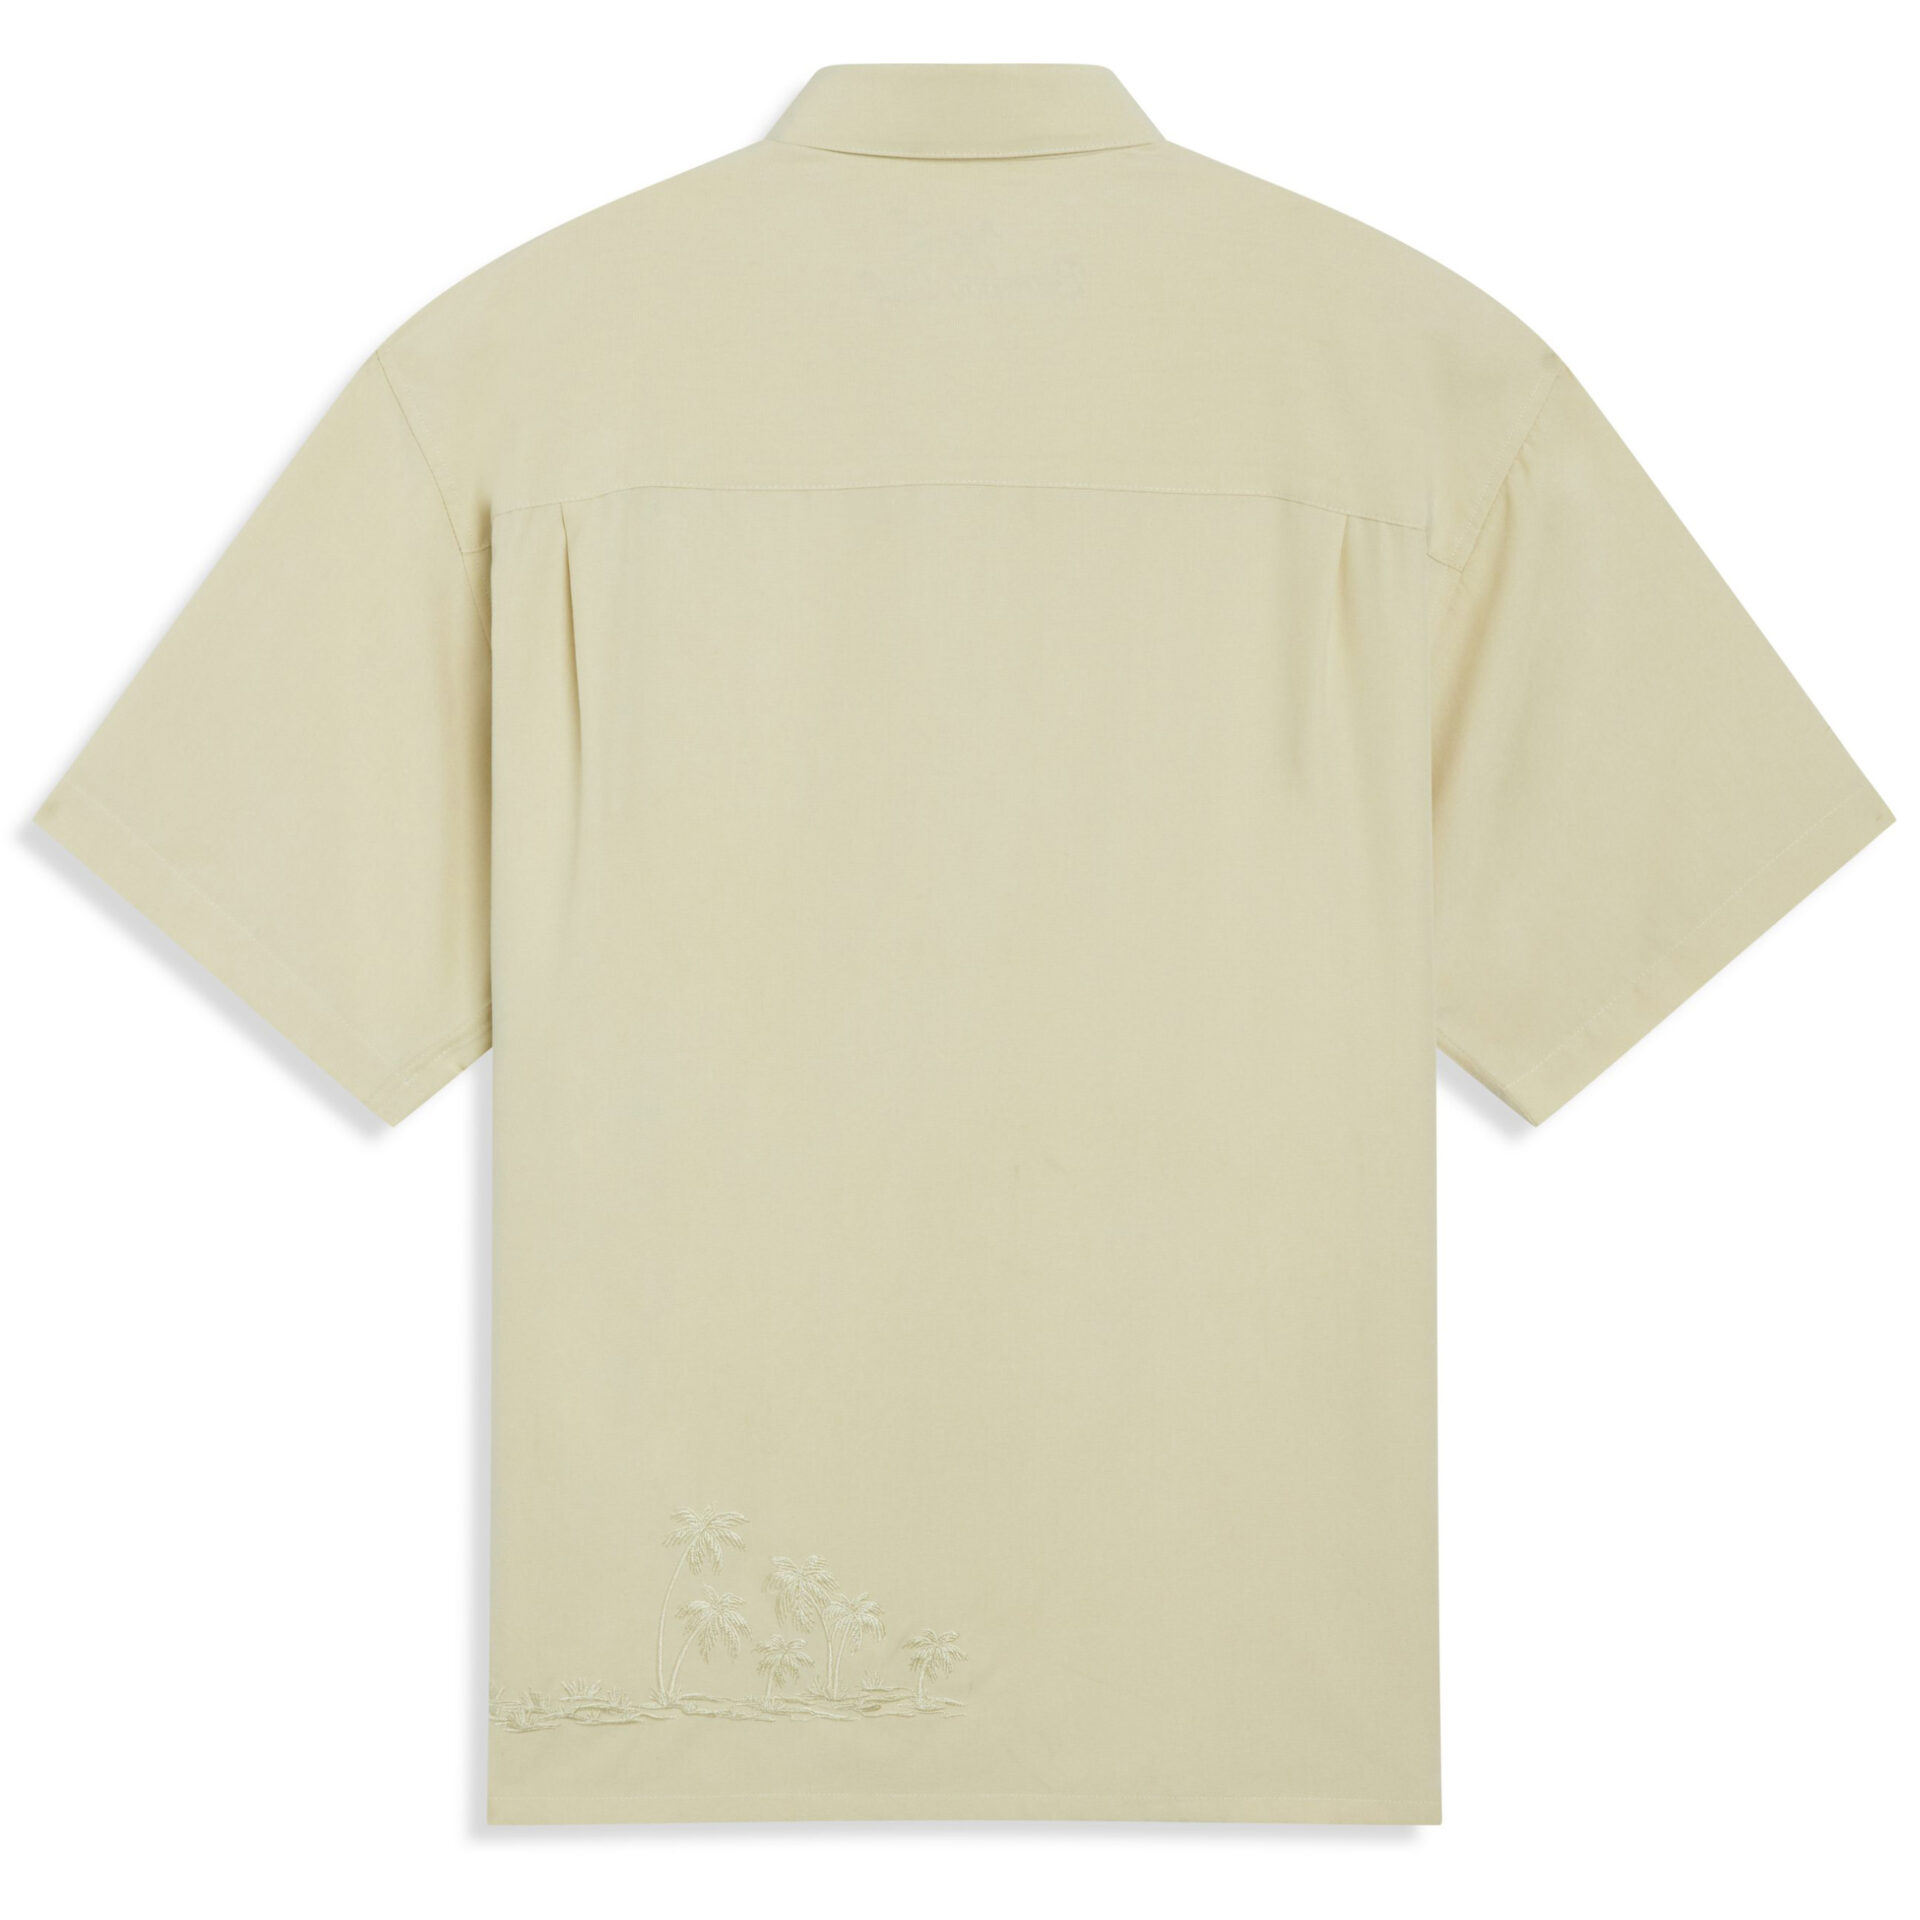 Bamboo-Cay-Mens-Shirt-Elevated-Palms-Cream-Back-View